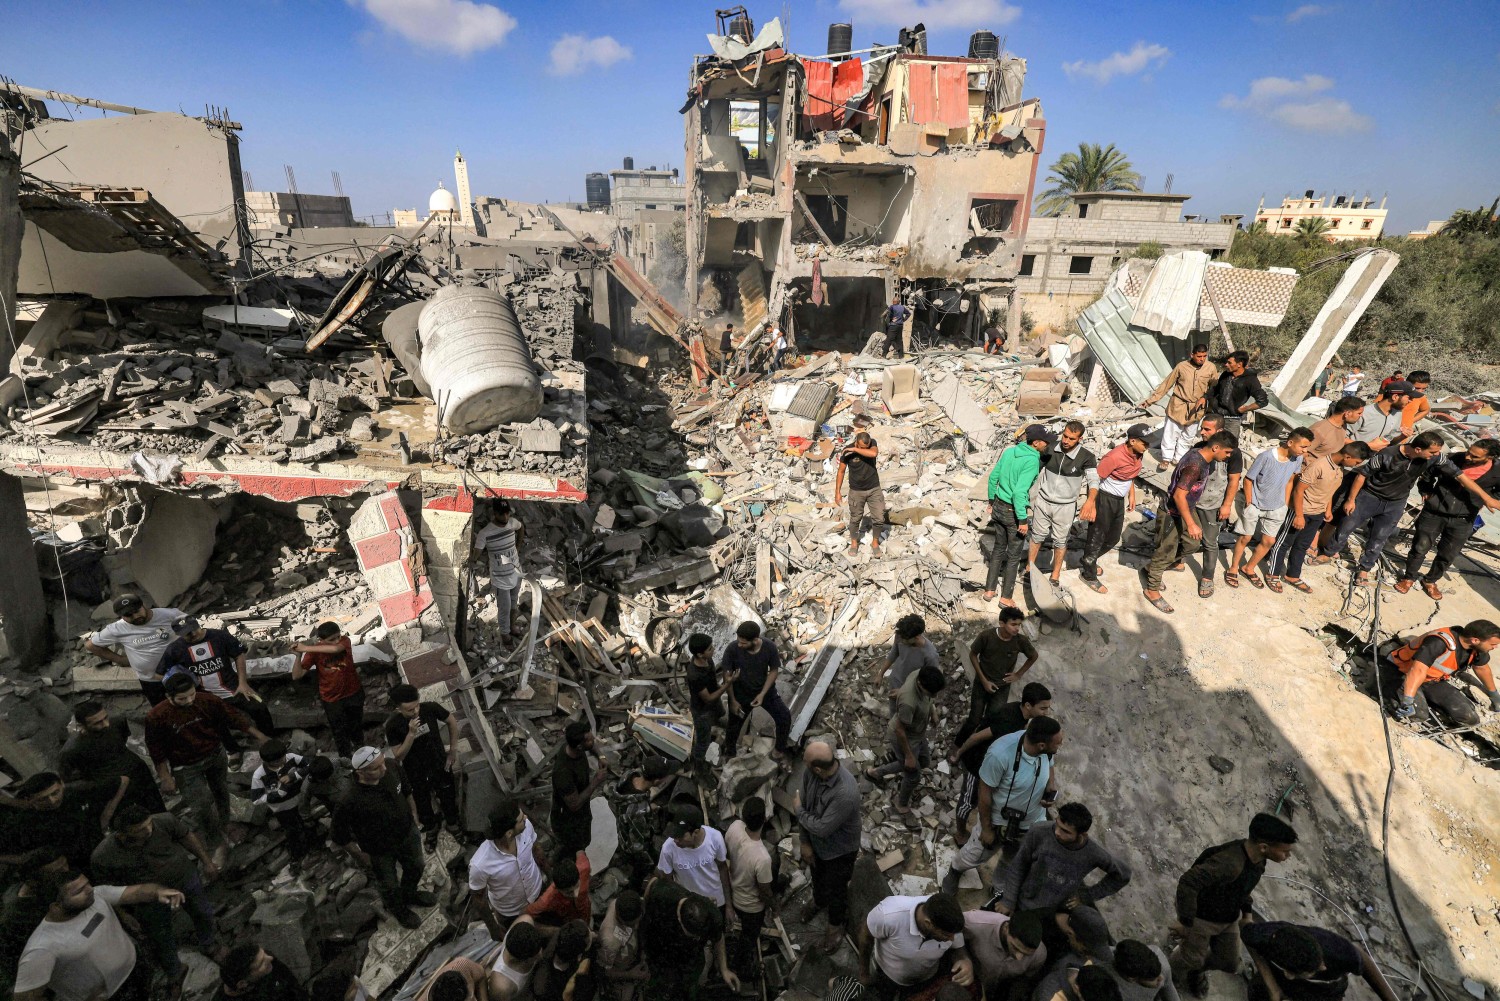 People gather by a collapsed building after an Israeli strike in Khan Yunis in the southern Gaza Strip. MAHMUD HAMS/AFP/GETTY IMAGES